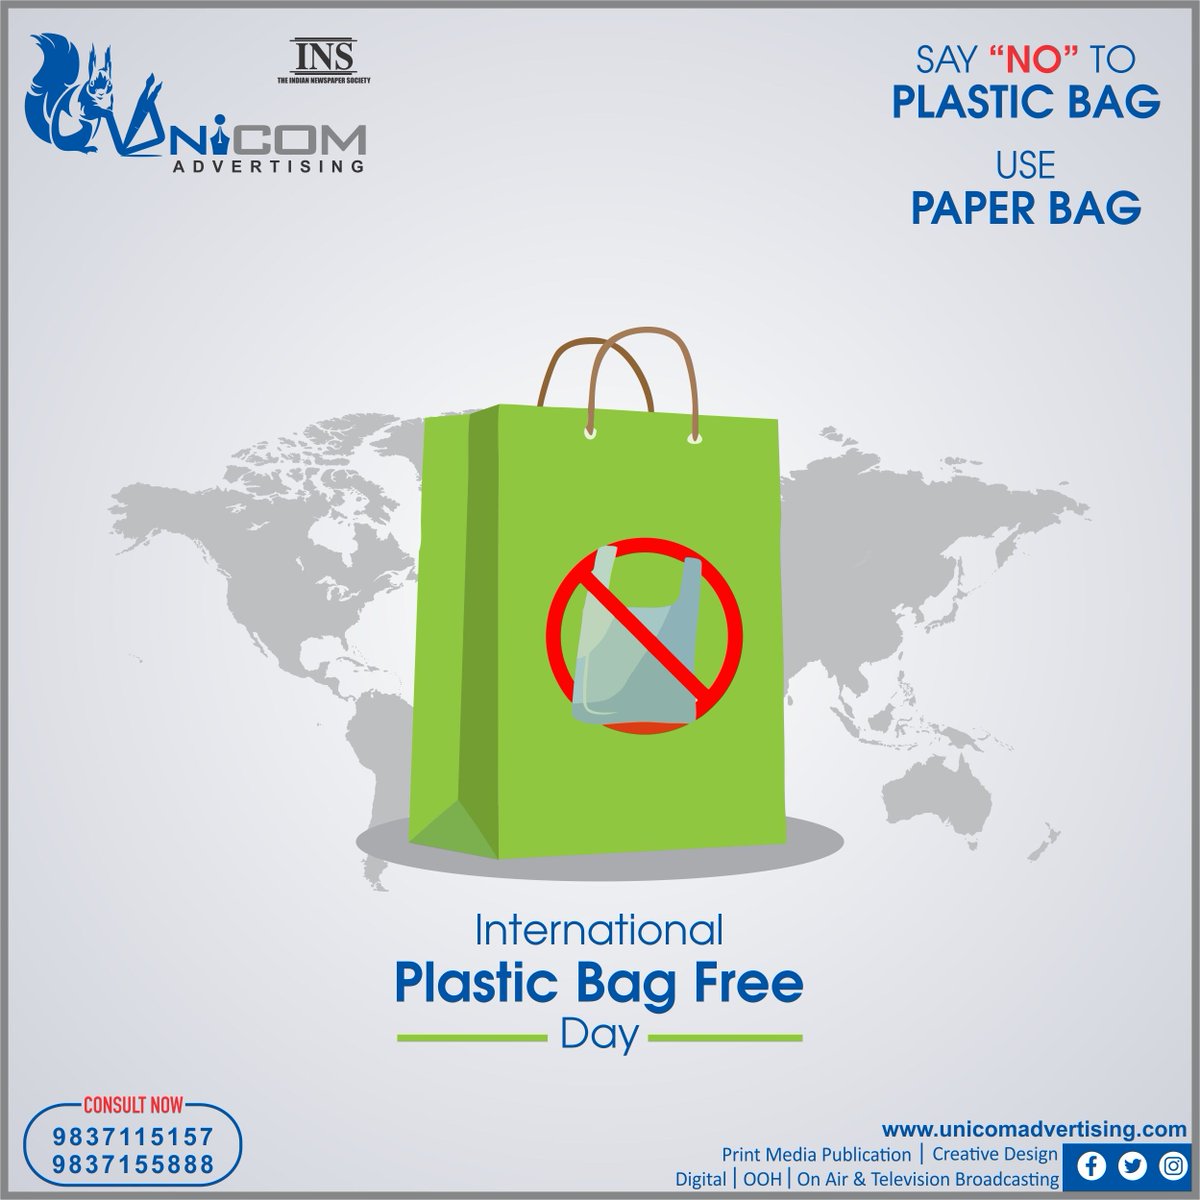 Today is International Plastic Bag Free Day, actually, the whole month is called Plastic-free July. Polythene is very harmful to humans and all animals so avoid its use. 

#UnicomAdvertising #InternationalPlasticBagFreeDay #PlasticBagFreeDay #NoPlasticBag #PlasticFreeJuly2022